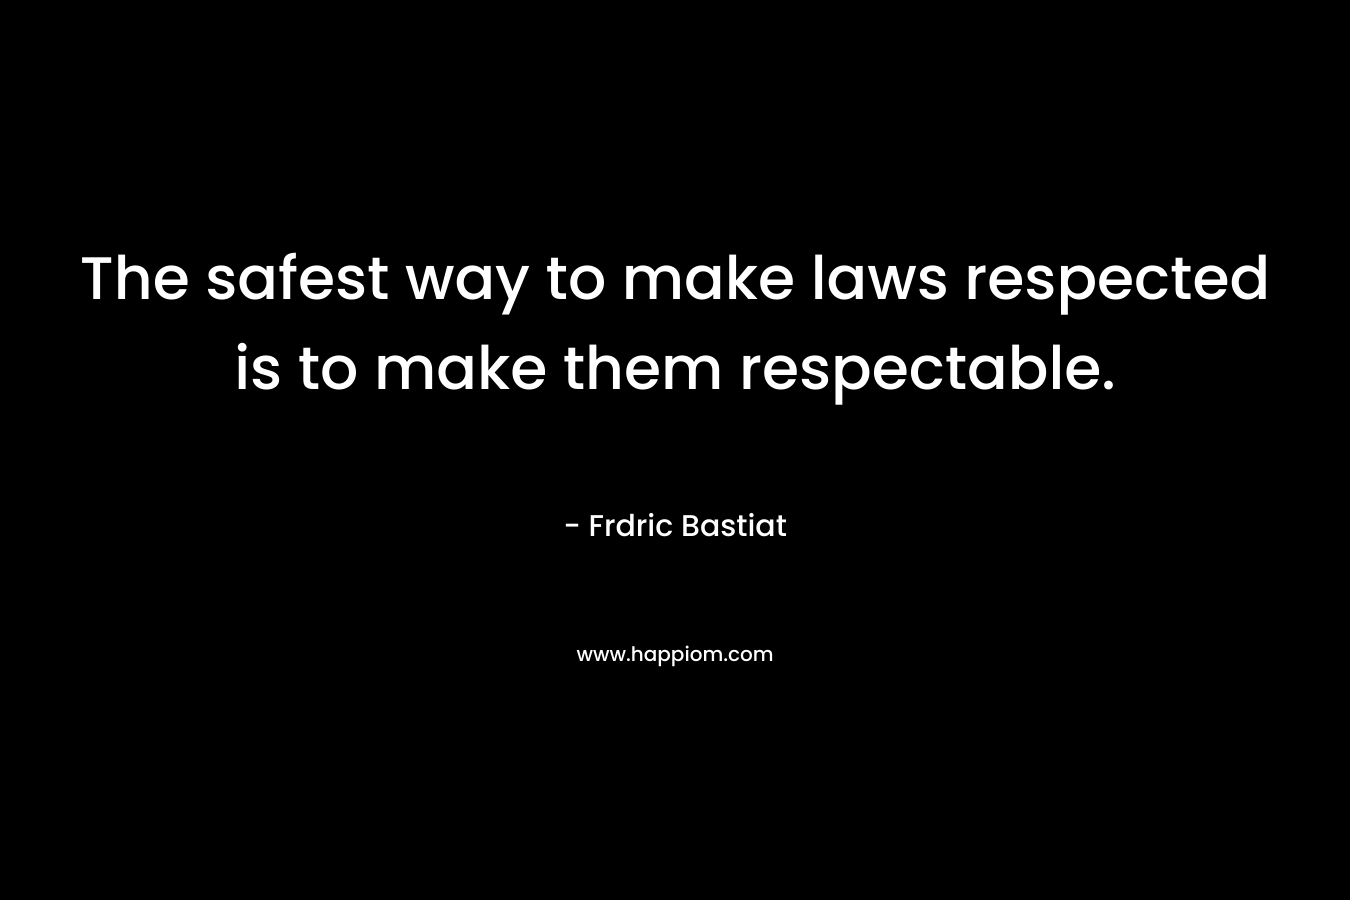 The safest way to make laws respected is to make them respectable. – Frdric Bastiat